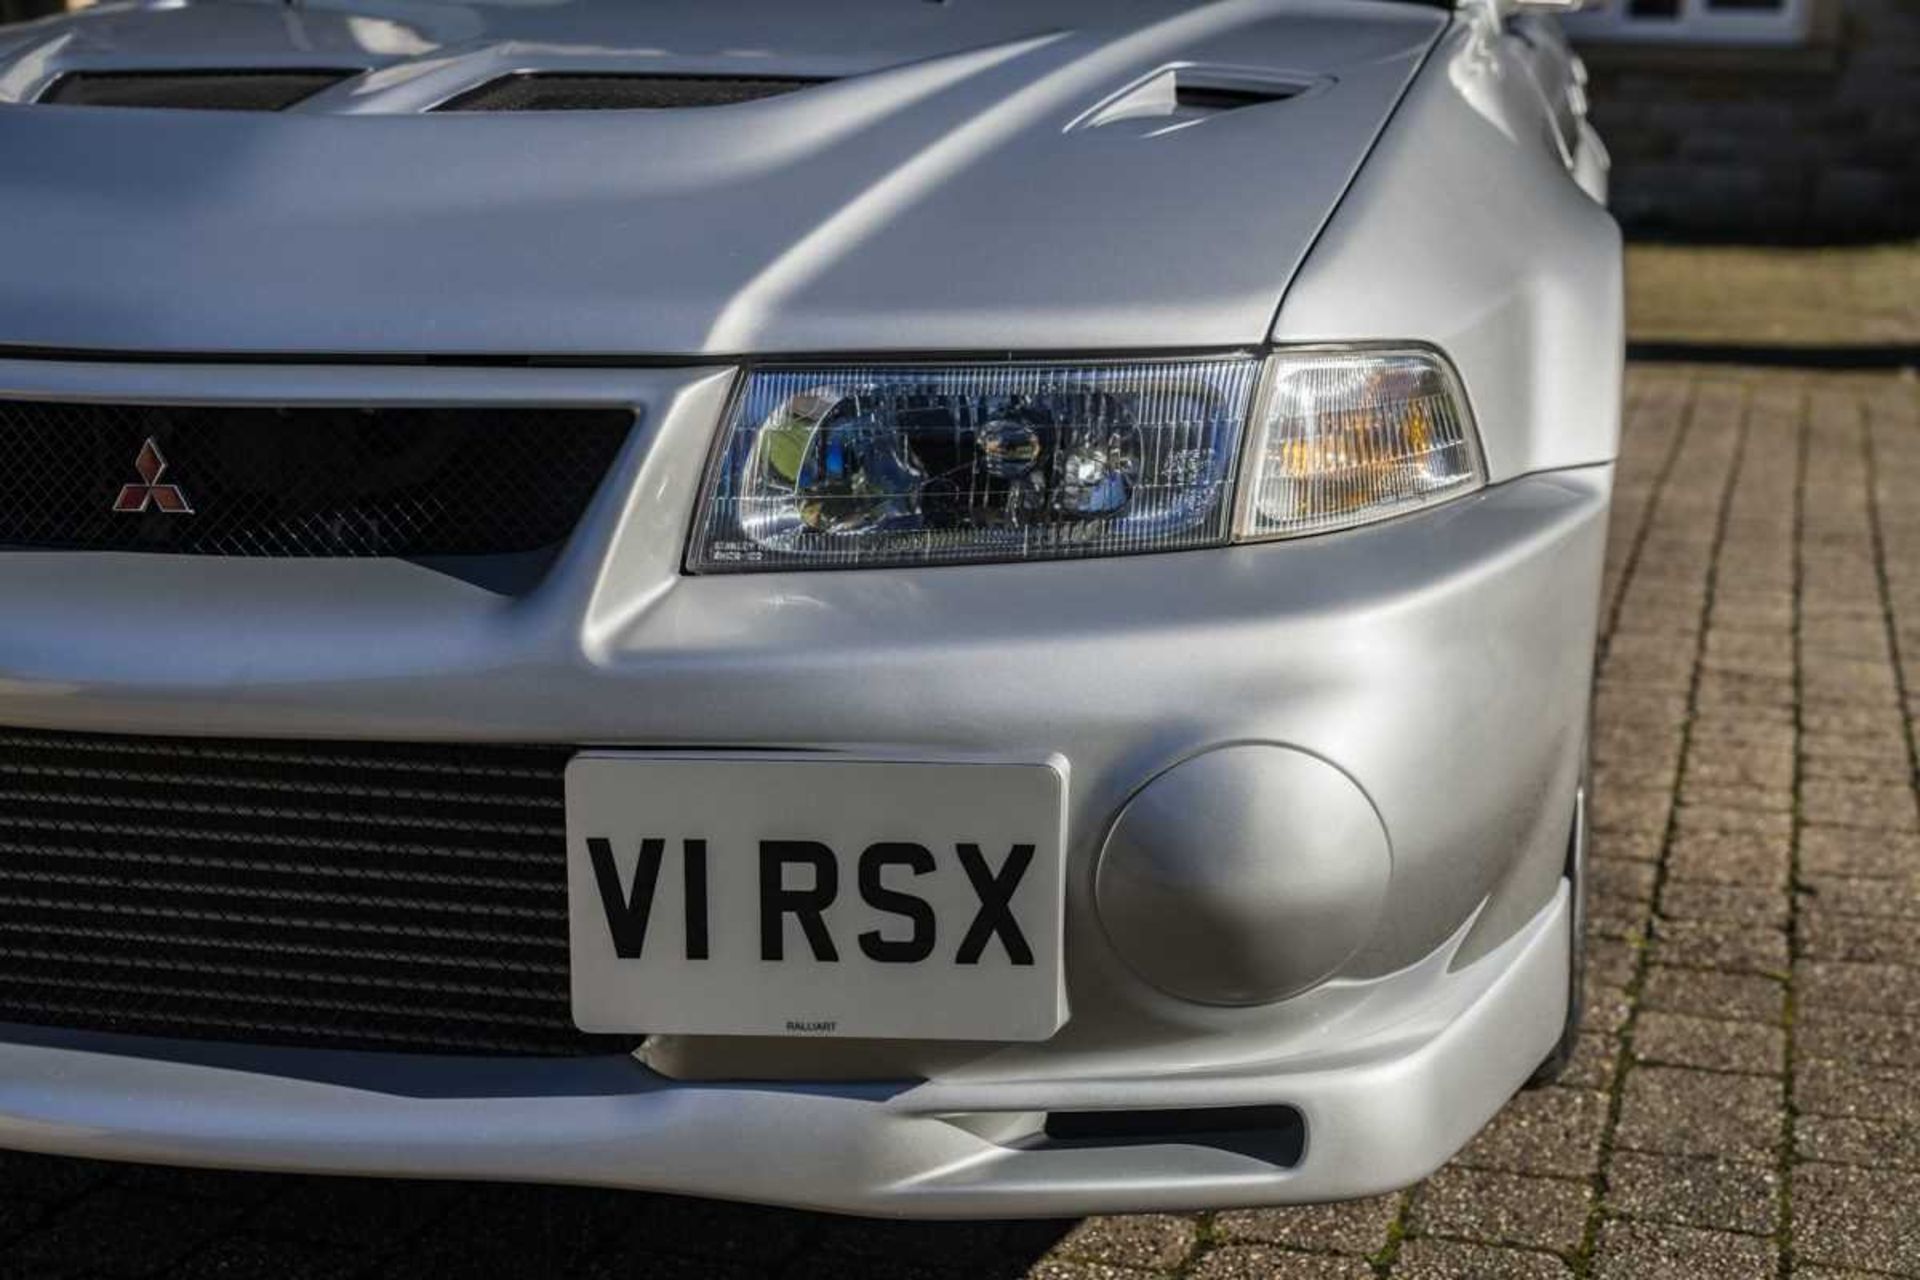 2000 Mitsubishi Lancer Evo VI RSX One of just thirty examples prepared by Ralliart and the flagship  - Image 20 of 65